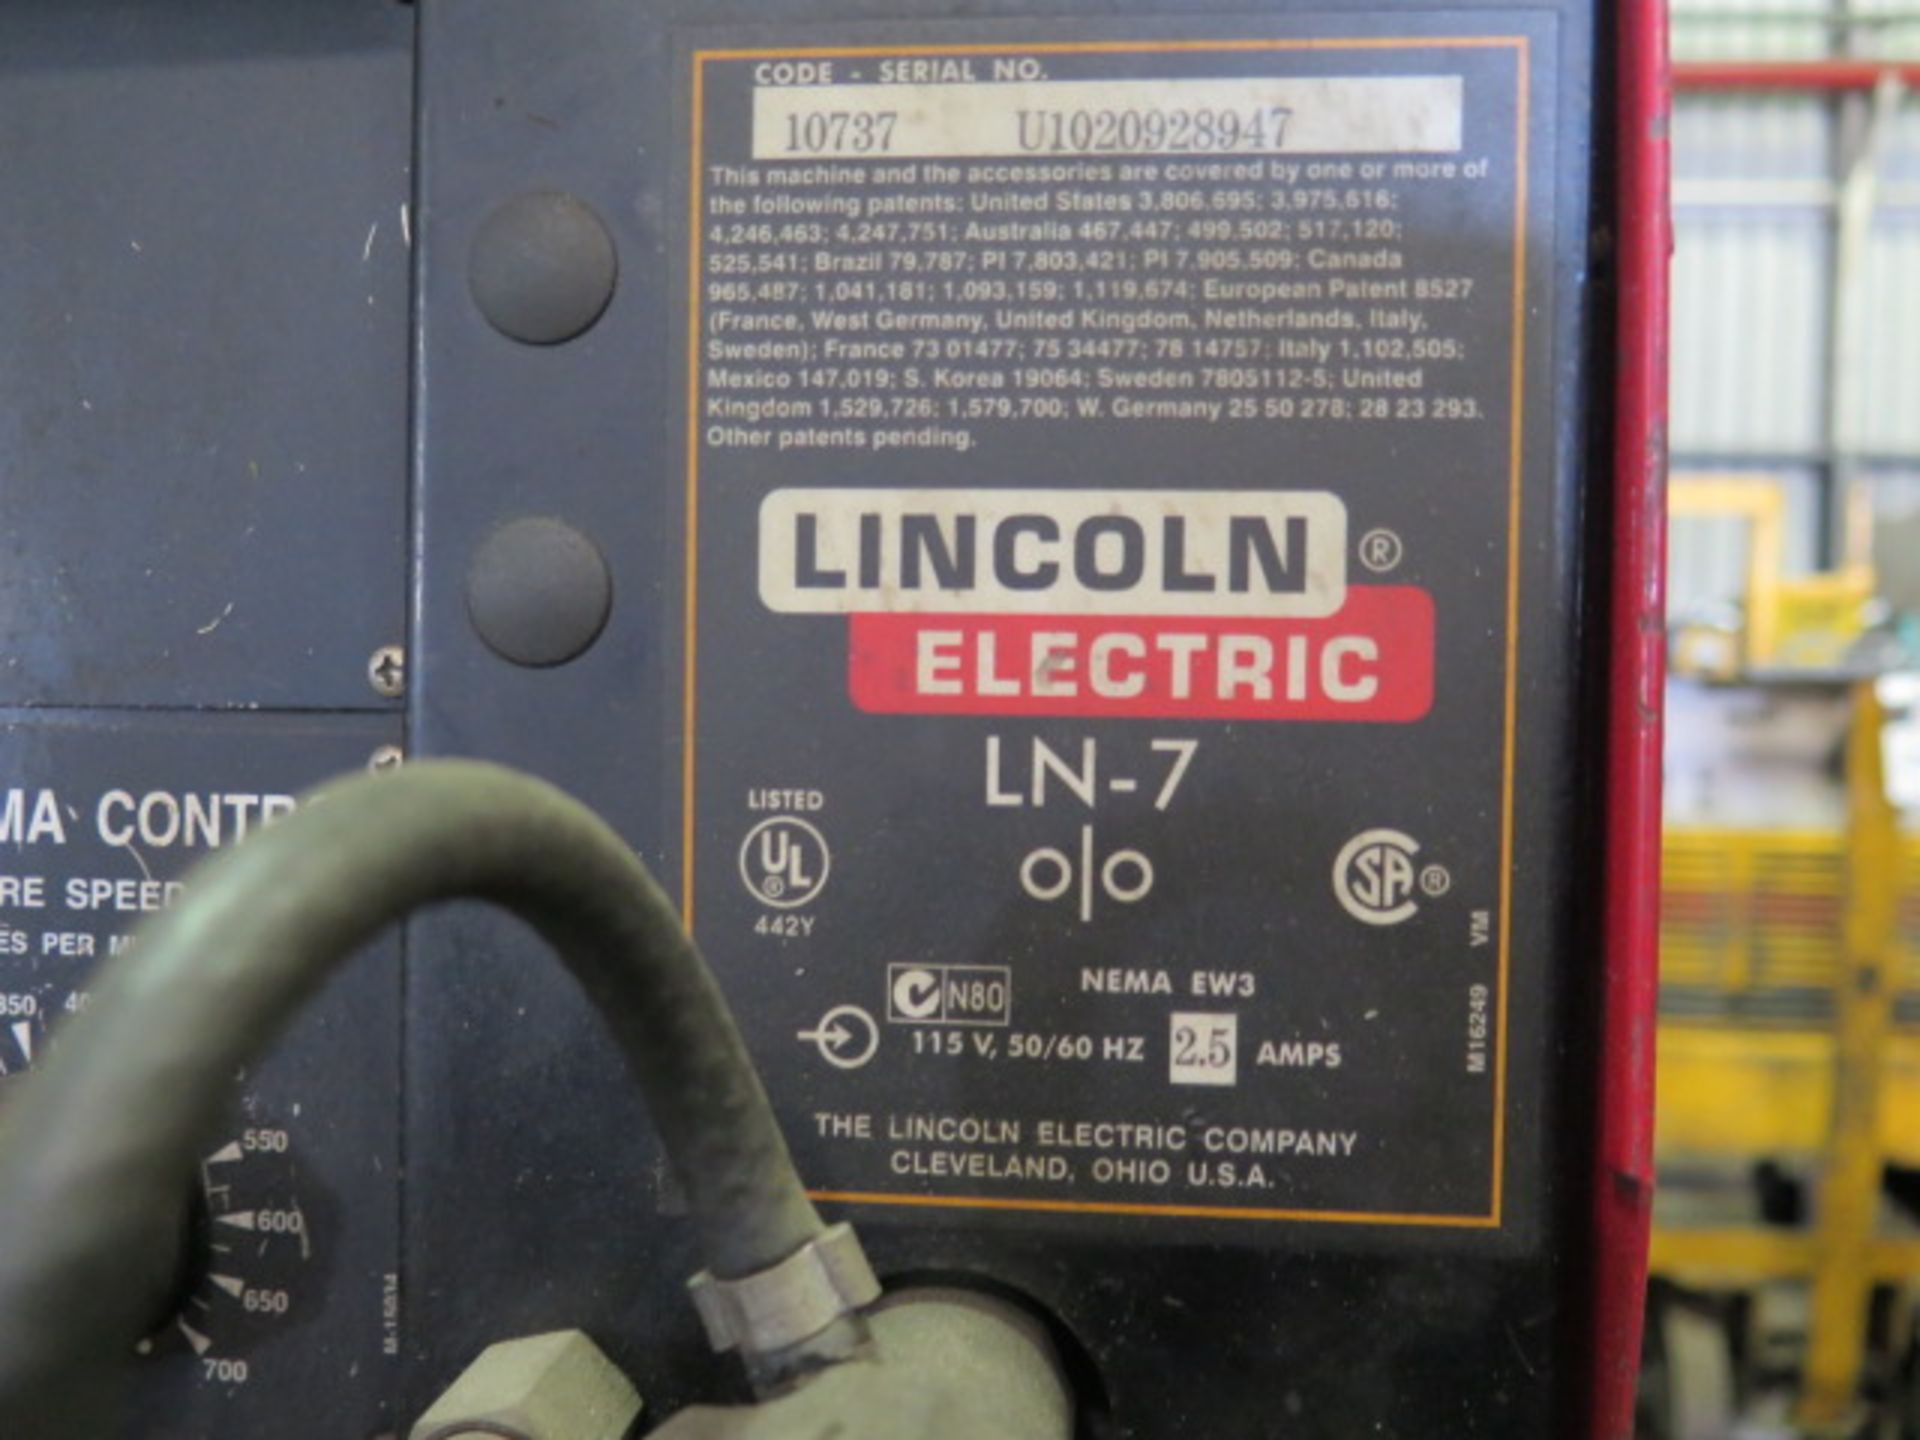 Lincoln CV-300 Arc Welding Power Source w/ Lincoln LN-7 Wire Feed (SOLD AS-IS - NO WARRANTY) - Image 8 of 12